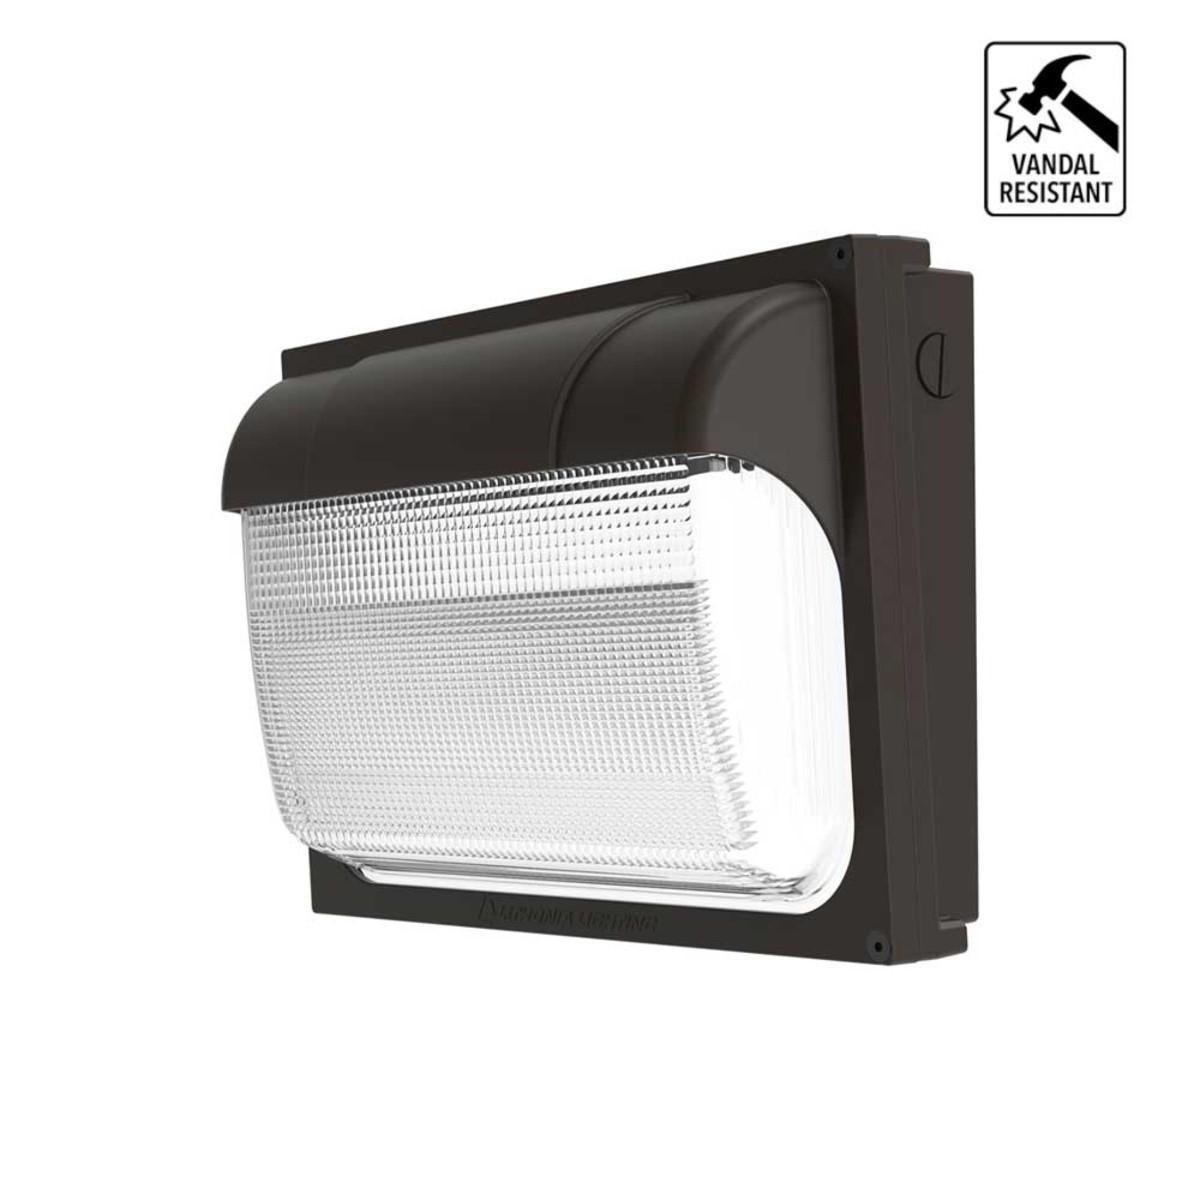 LED Standard Wall Pack With Photocell 54 Watts Adjustable 6,600 Lumens 4000K 120-277V